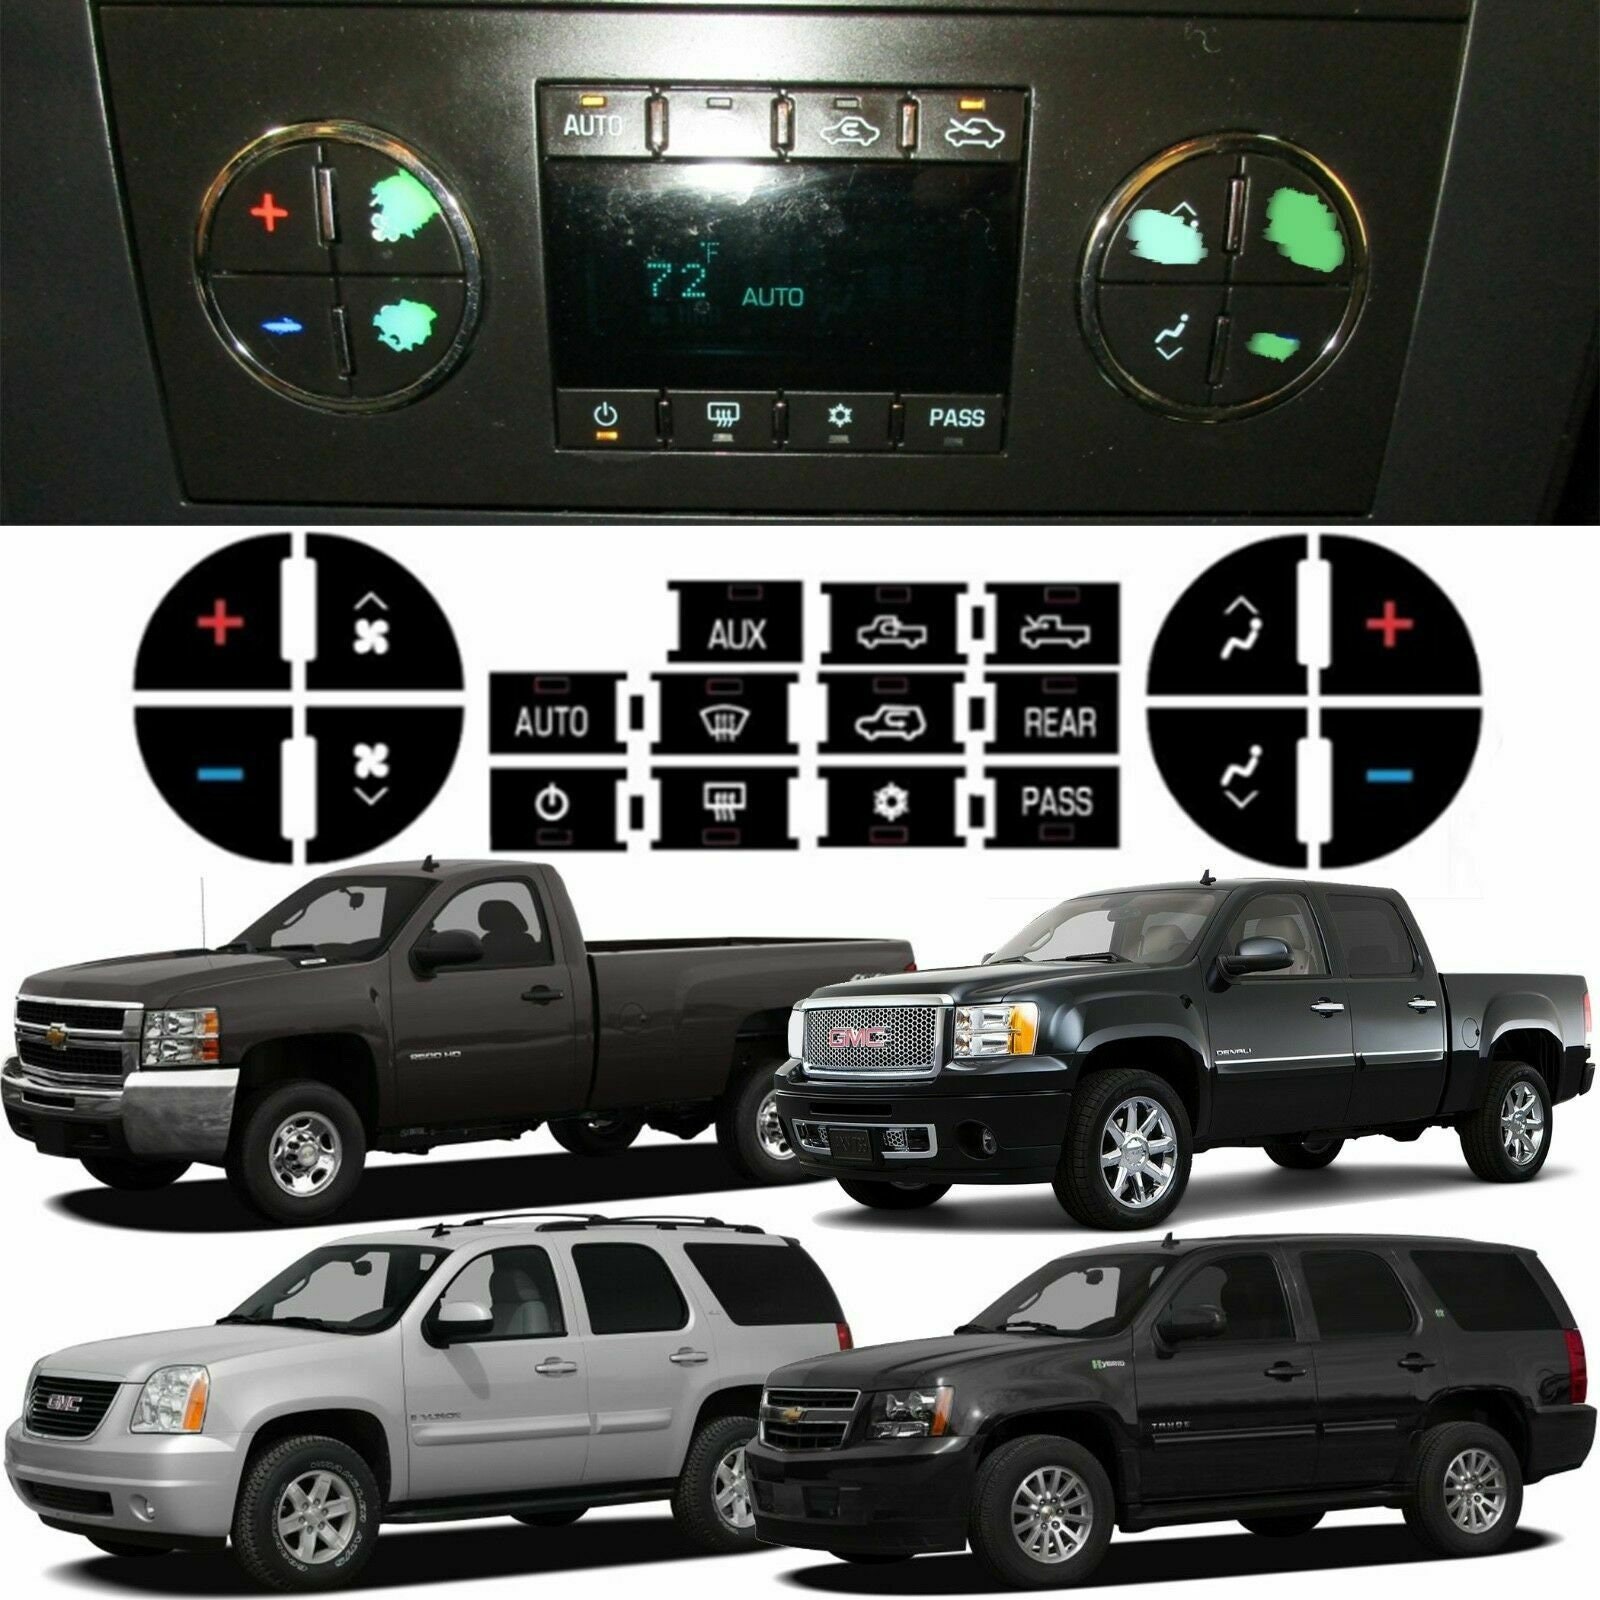 AC Dash Button Repair Kit, Car Button Decals - Best for Fixing Ruined Faded  Buttons Sticker Replacement Fits Chevrolet Models 